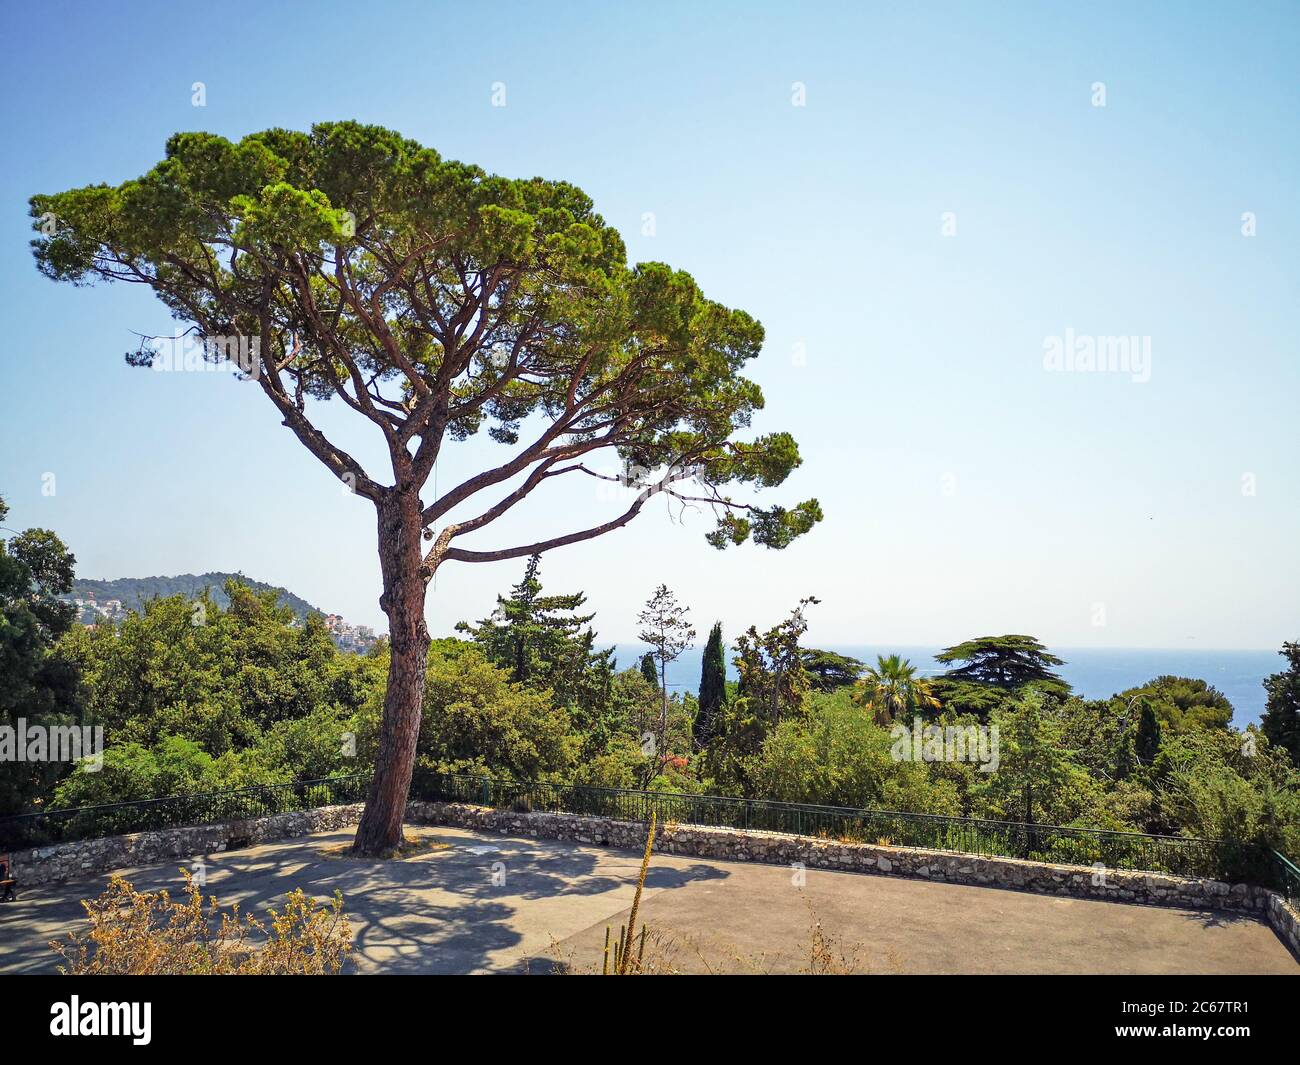 Beautiful lonely Italian stone umbrella pine (Pinus pinea) growing high in the Mount Boront Park on the hill over Nice city with Mediterranean sea. Stock Photo